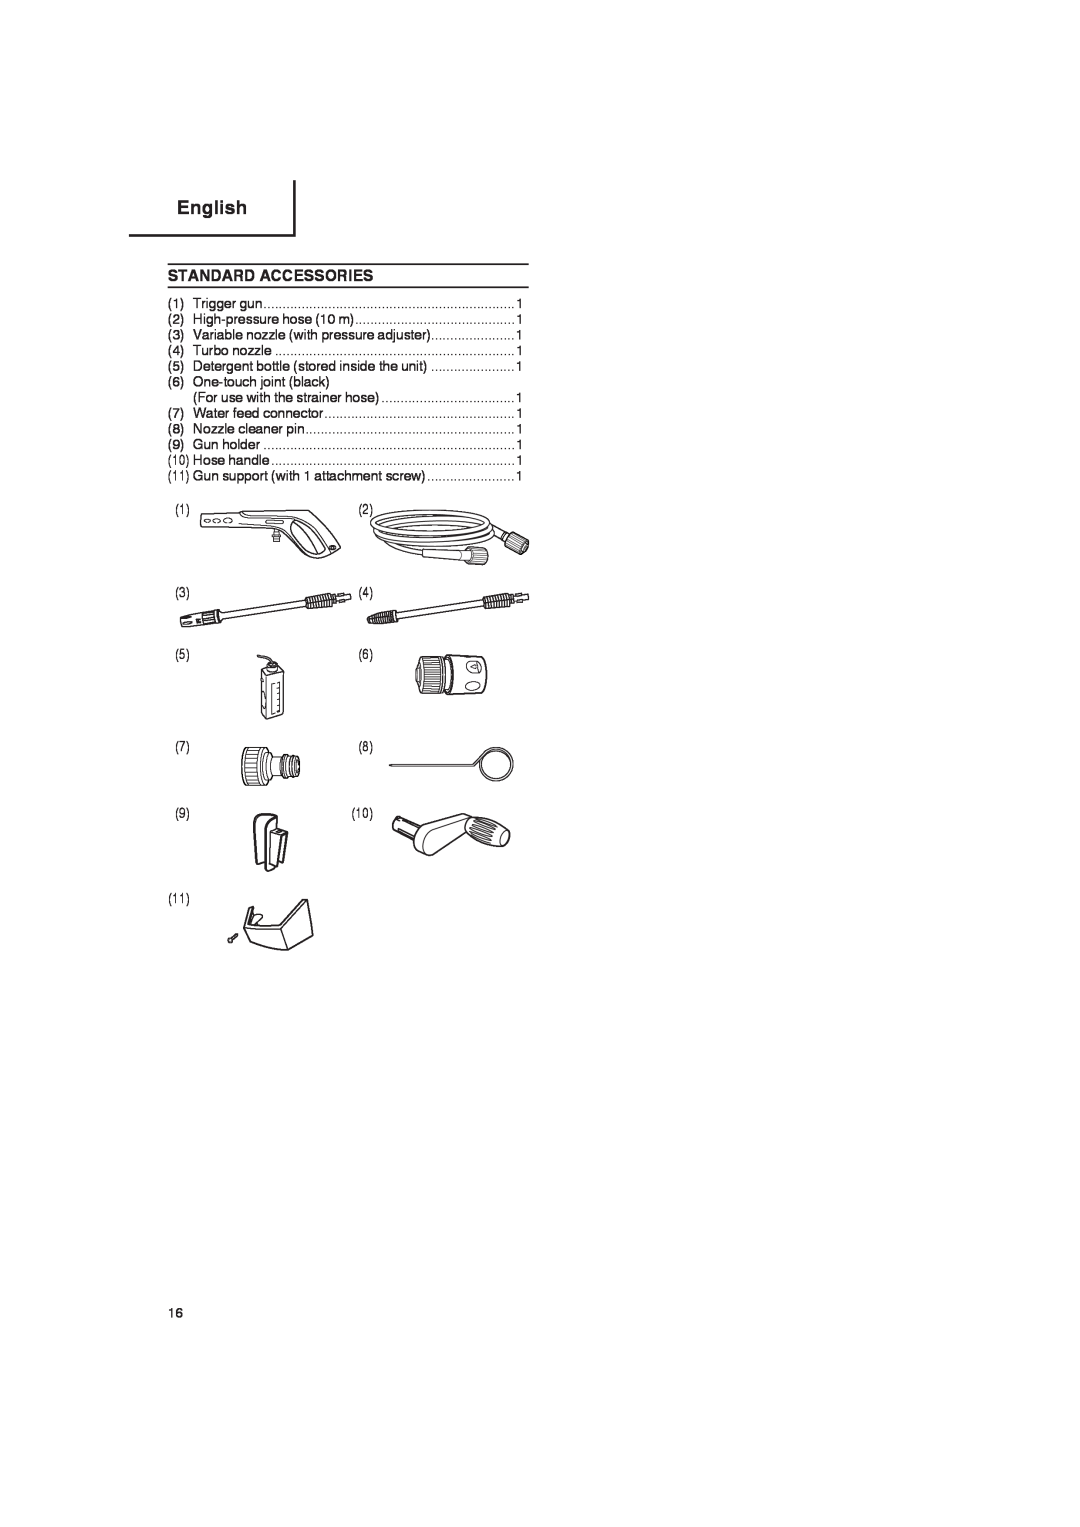 Hitachi Koki USA AW 150 manual Standard Accessories, English, Trigger gun, Turbo nozzle, For use with the strainer hose 